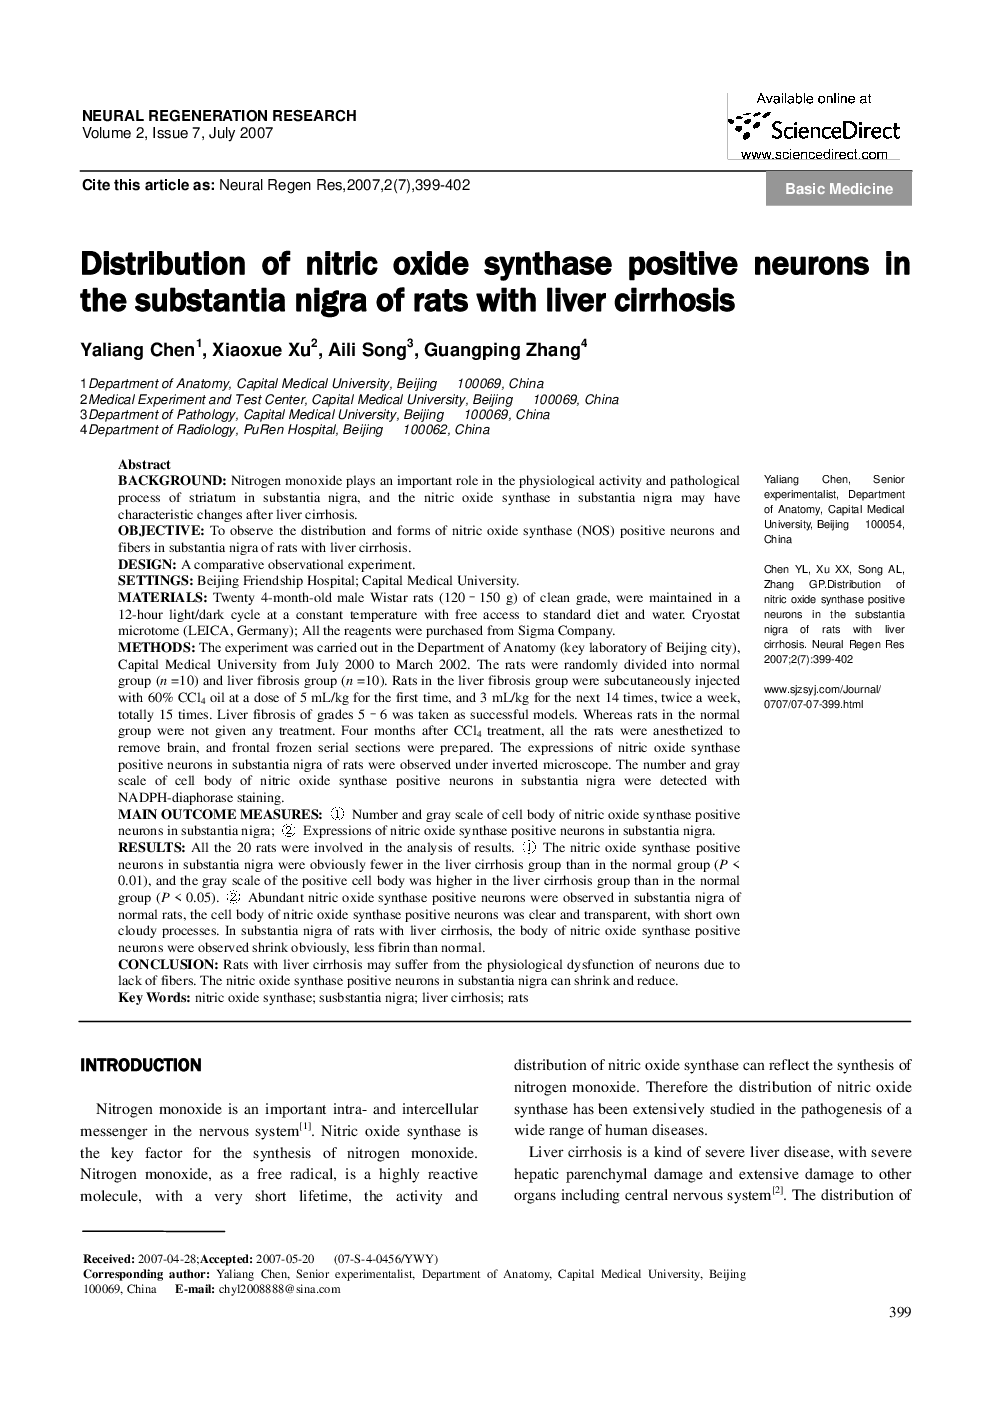 Distribution of nitric oxide synthase positive neurons in the substantia nigra of rats with liver cirrhosis